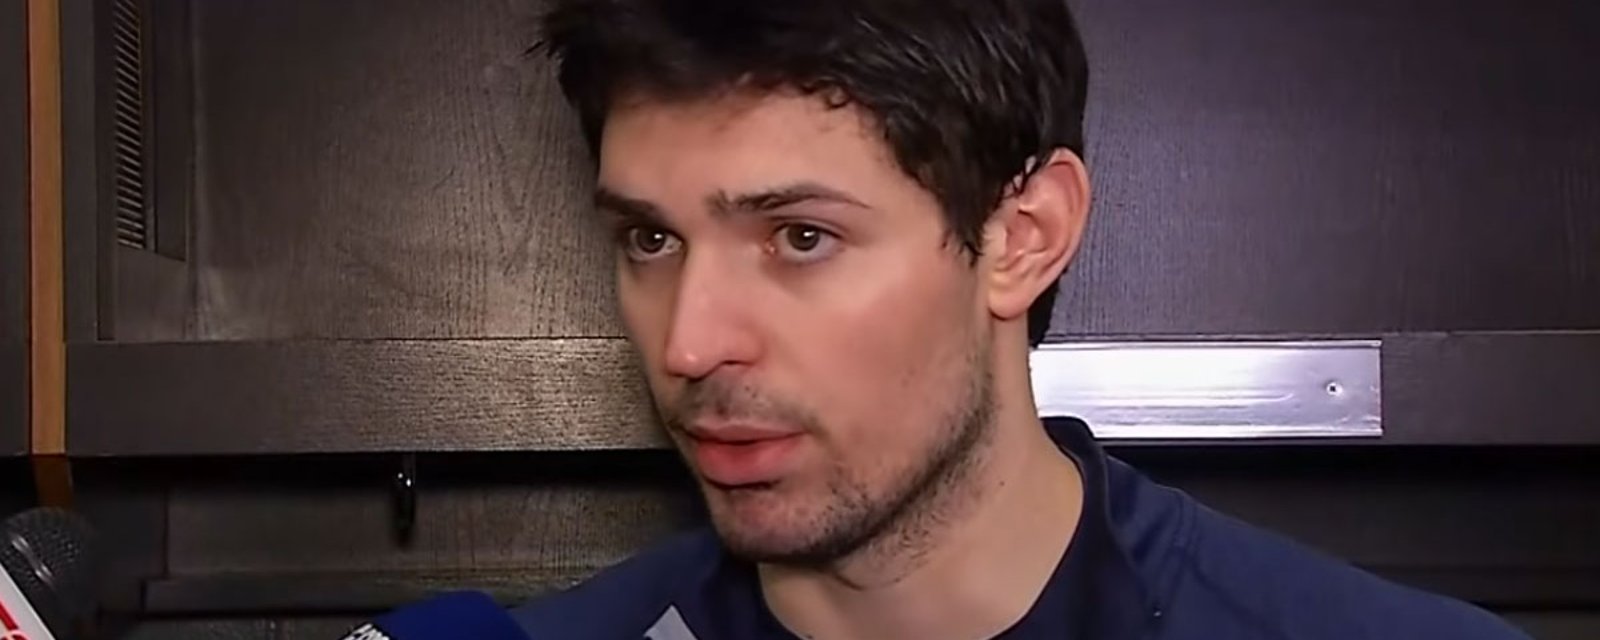 Carey Price: “I'd rather stick it out like everybody else”